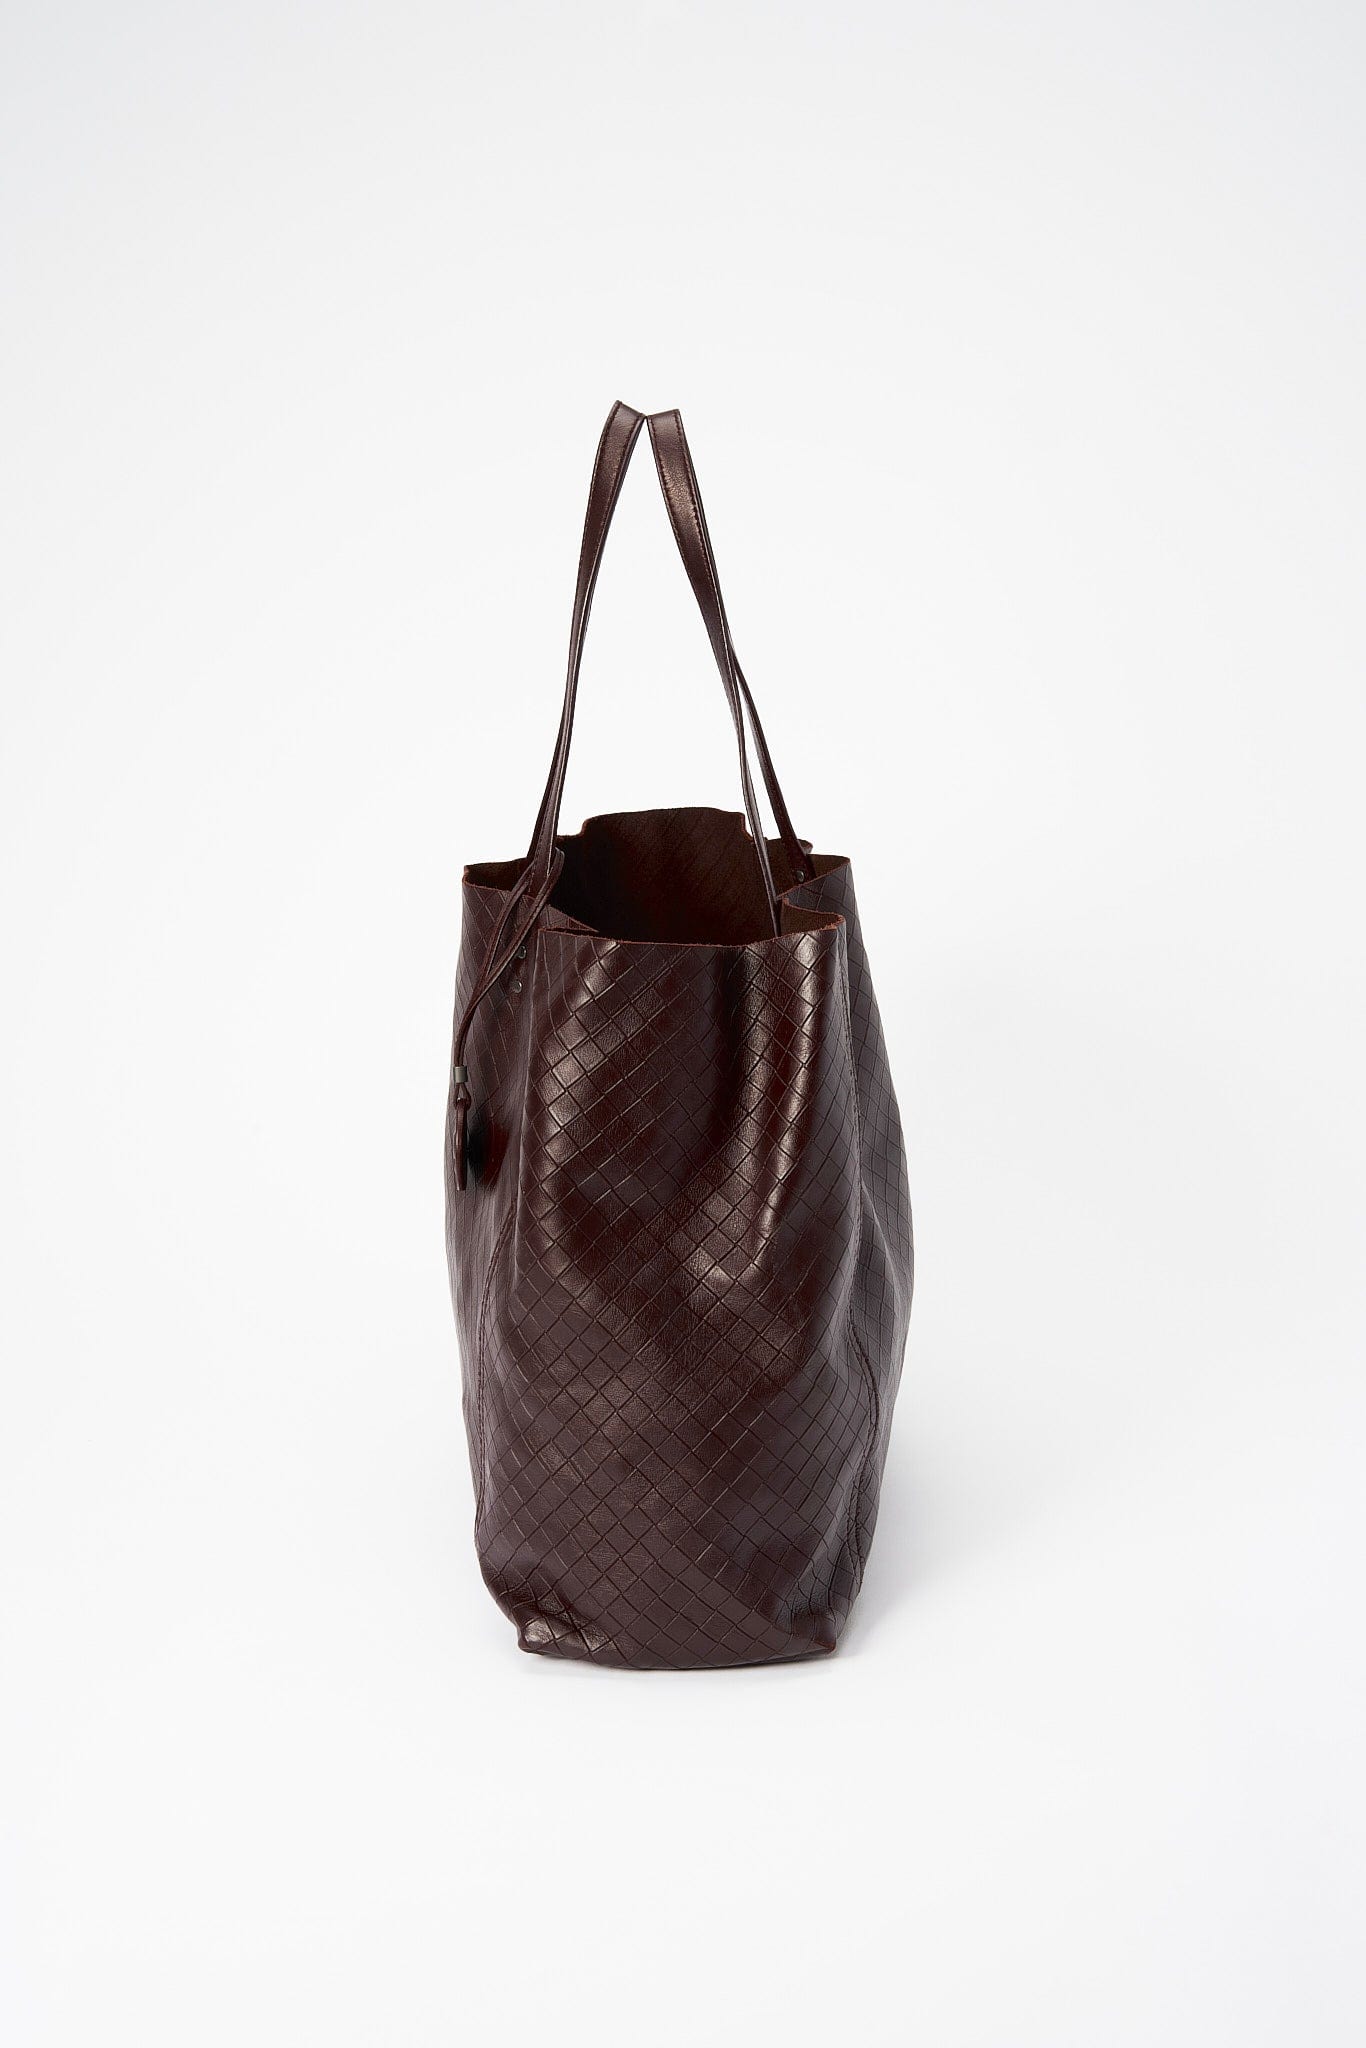 Bottega Veneta Brown Leather Tote Bag with Butterfly Charm